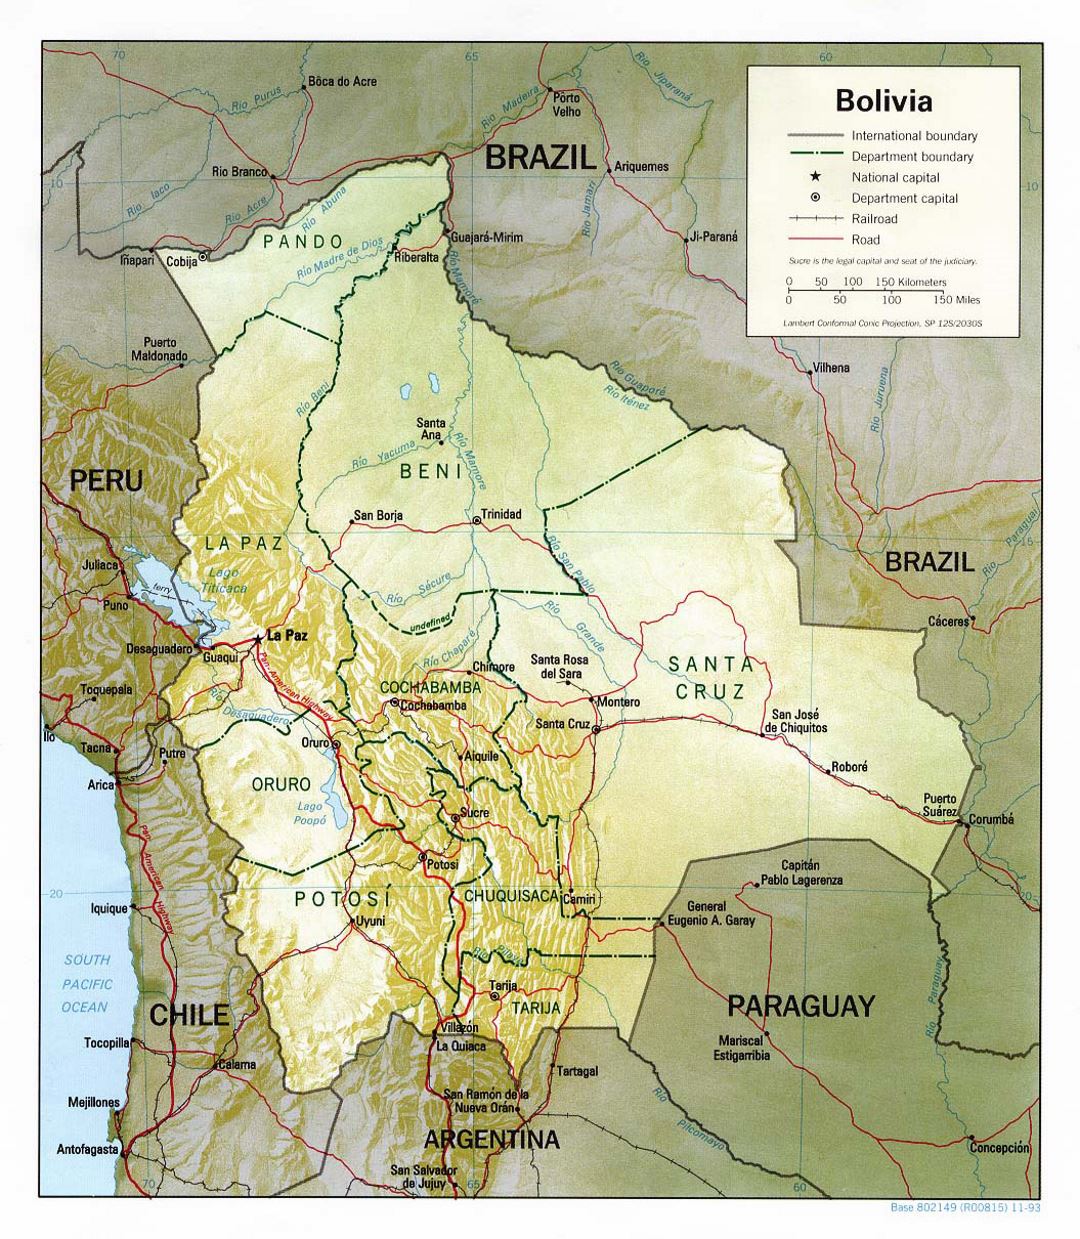 Detailed political and administrative map of Bolivia with relief, roads and major cities - 1993